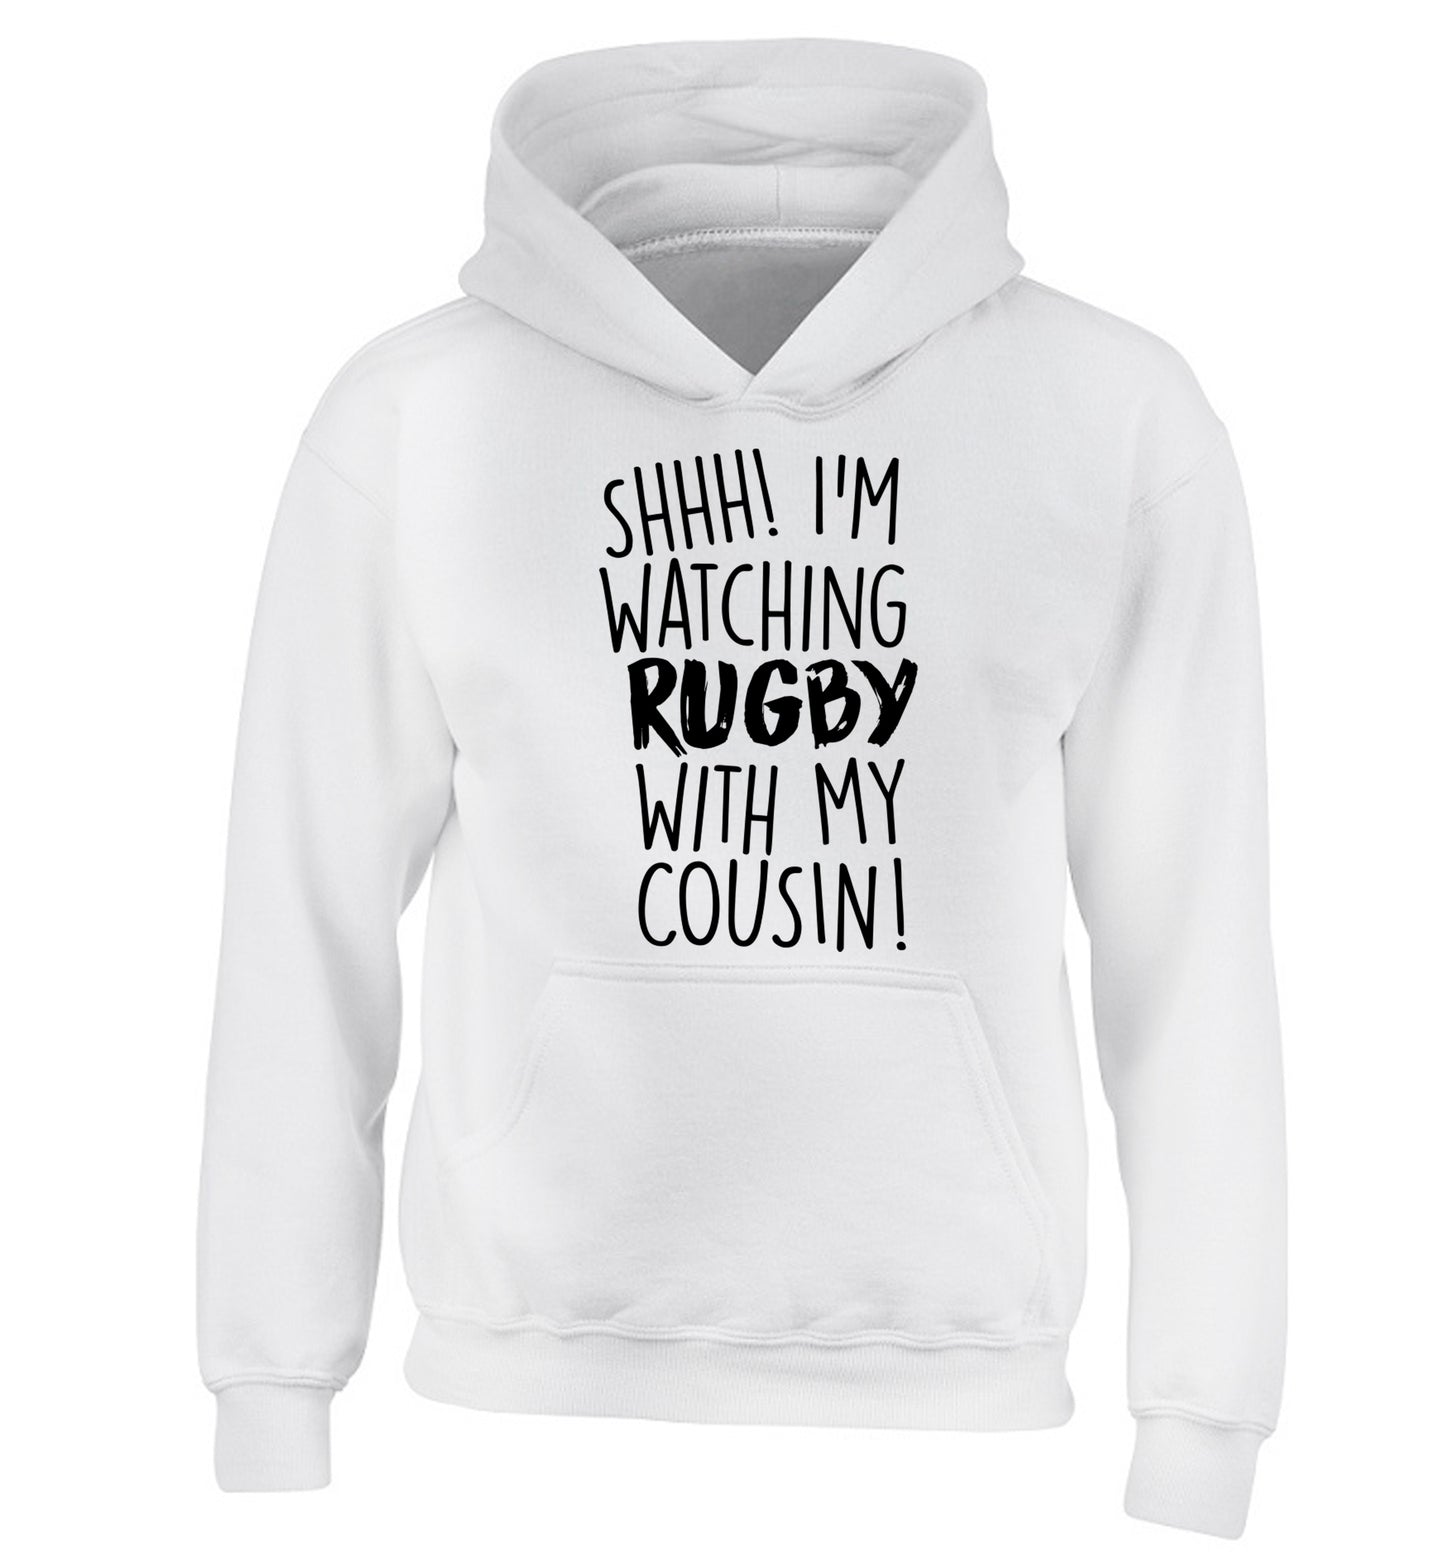 Shhh I'm watching rugby with my cousin children's white hoodie 12-13 Years